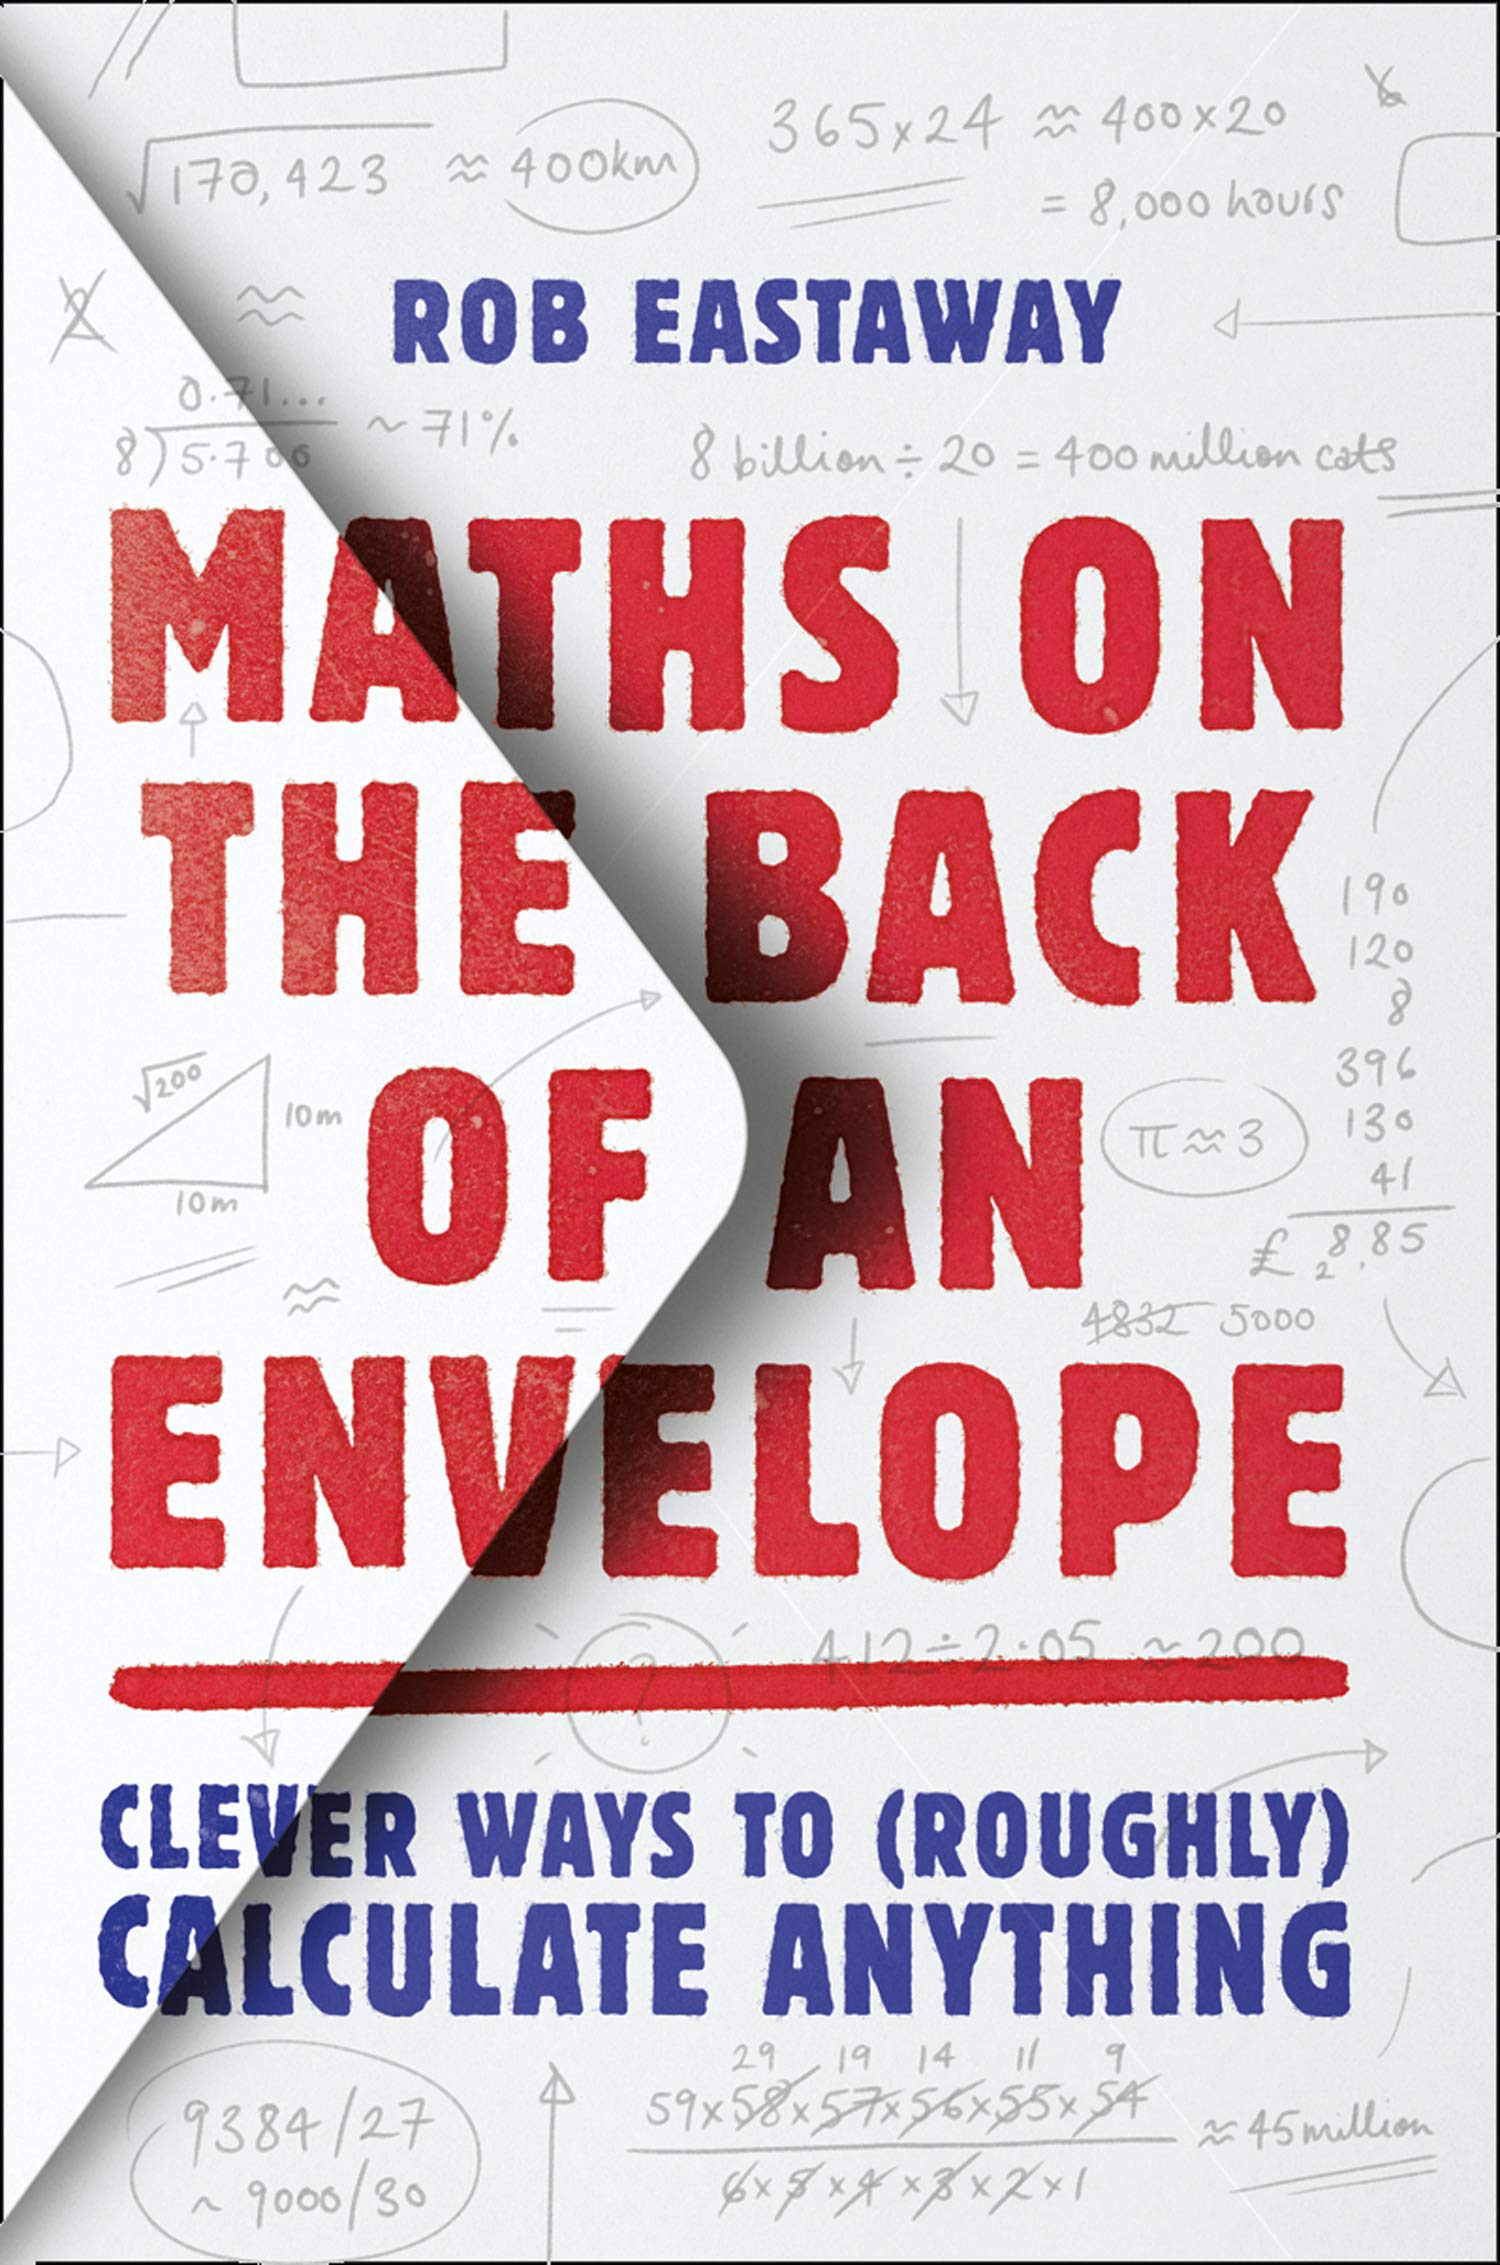 Maths on the Back of an Envelope | Rob Eastaway